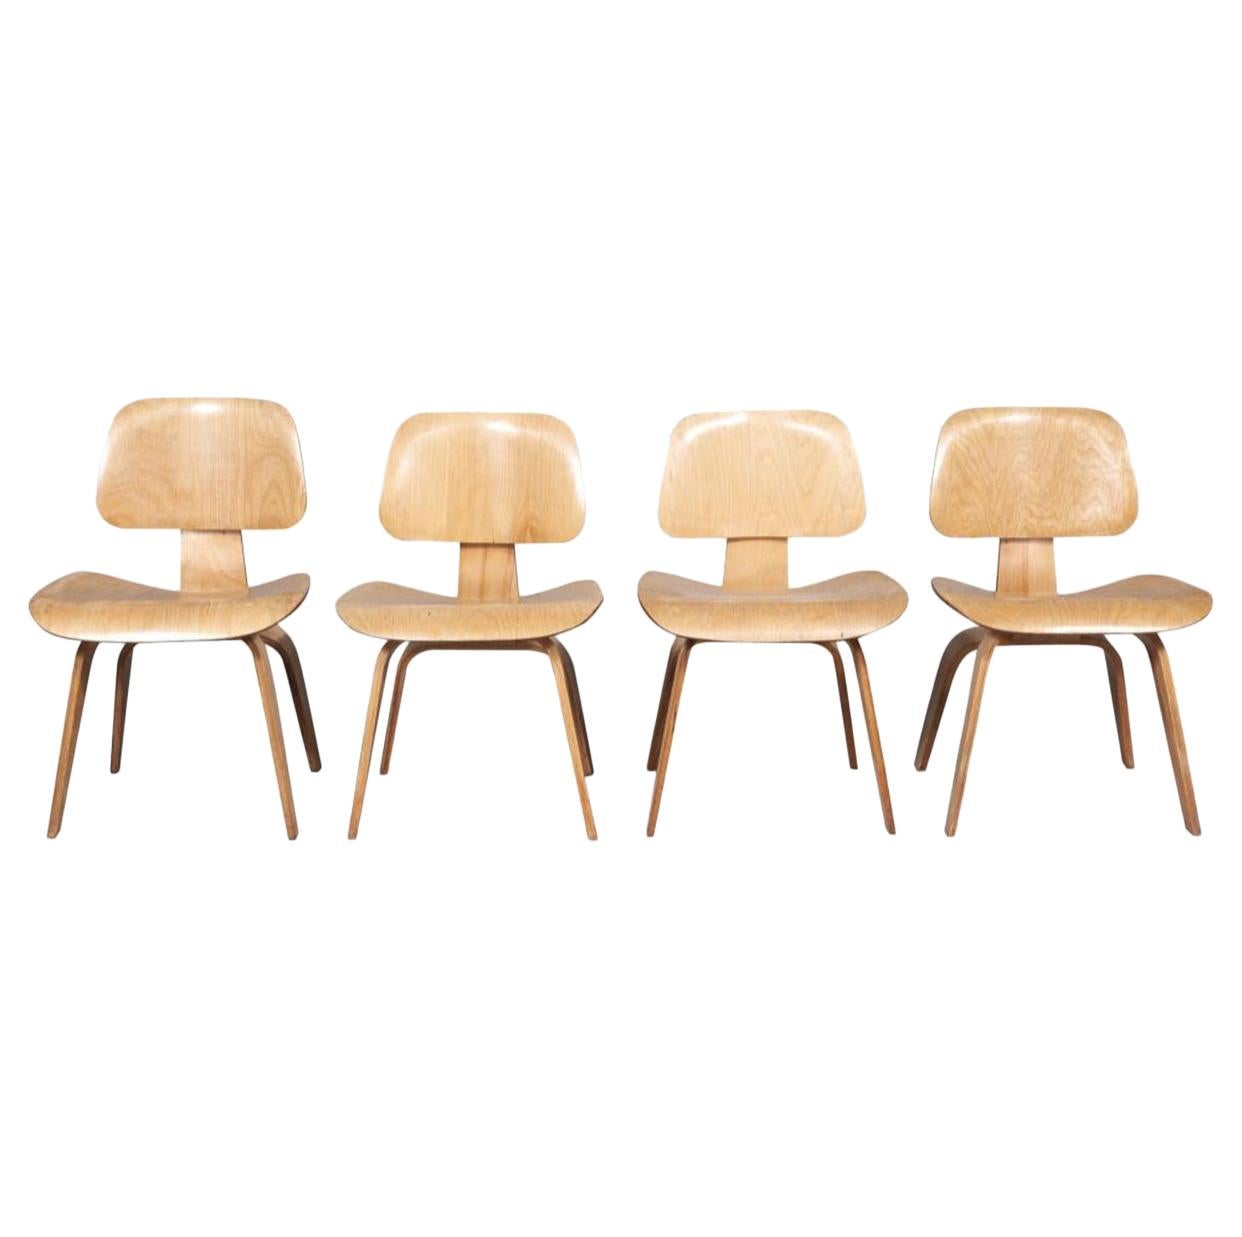 Four 1940s Early Eames DCW Dining Chairs by Evans Products